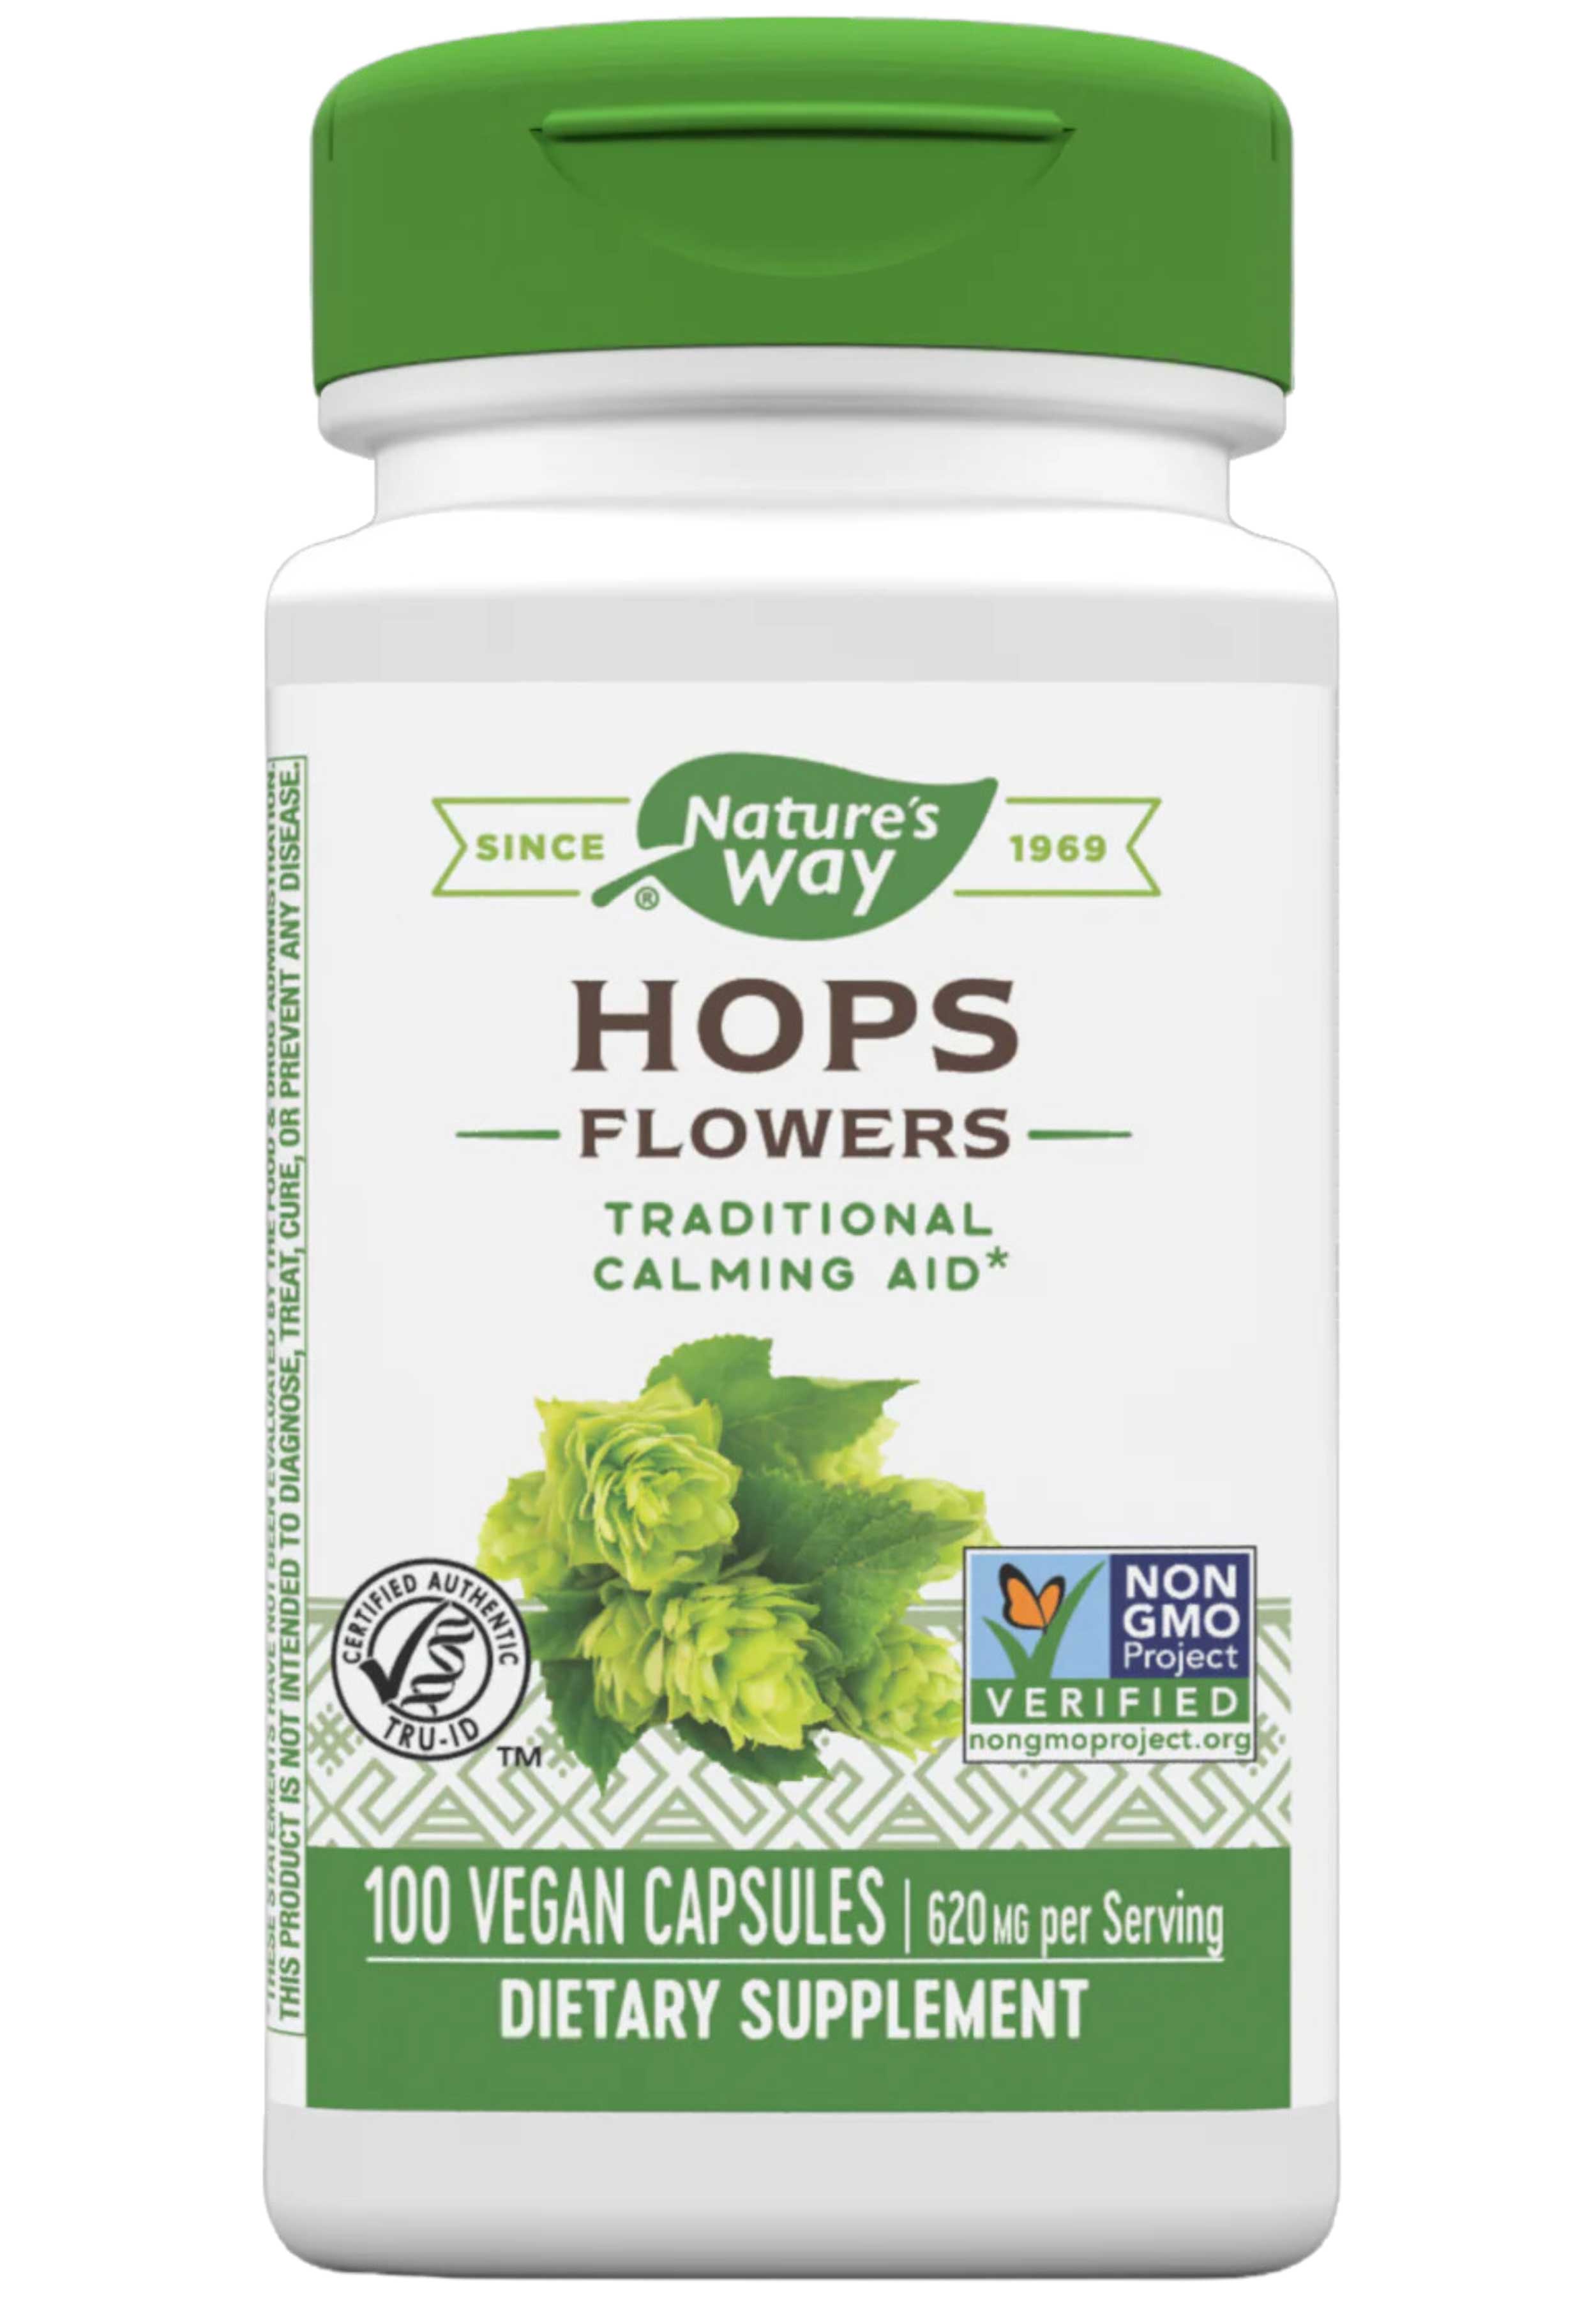 Nature's Way Hops Flowers